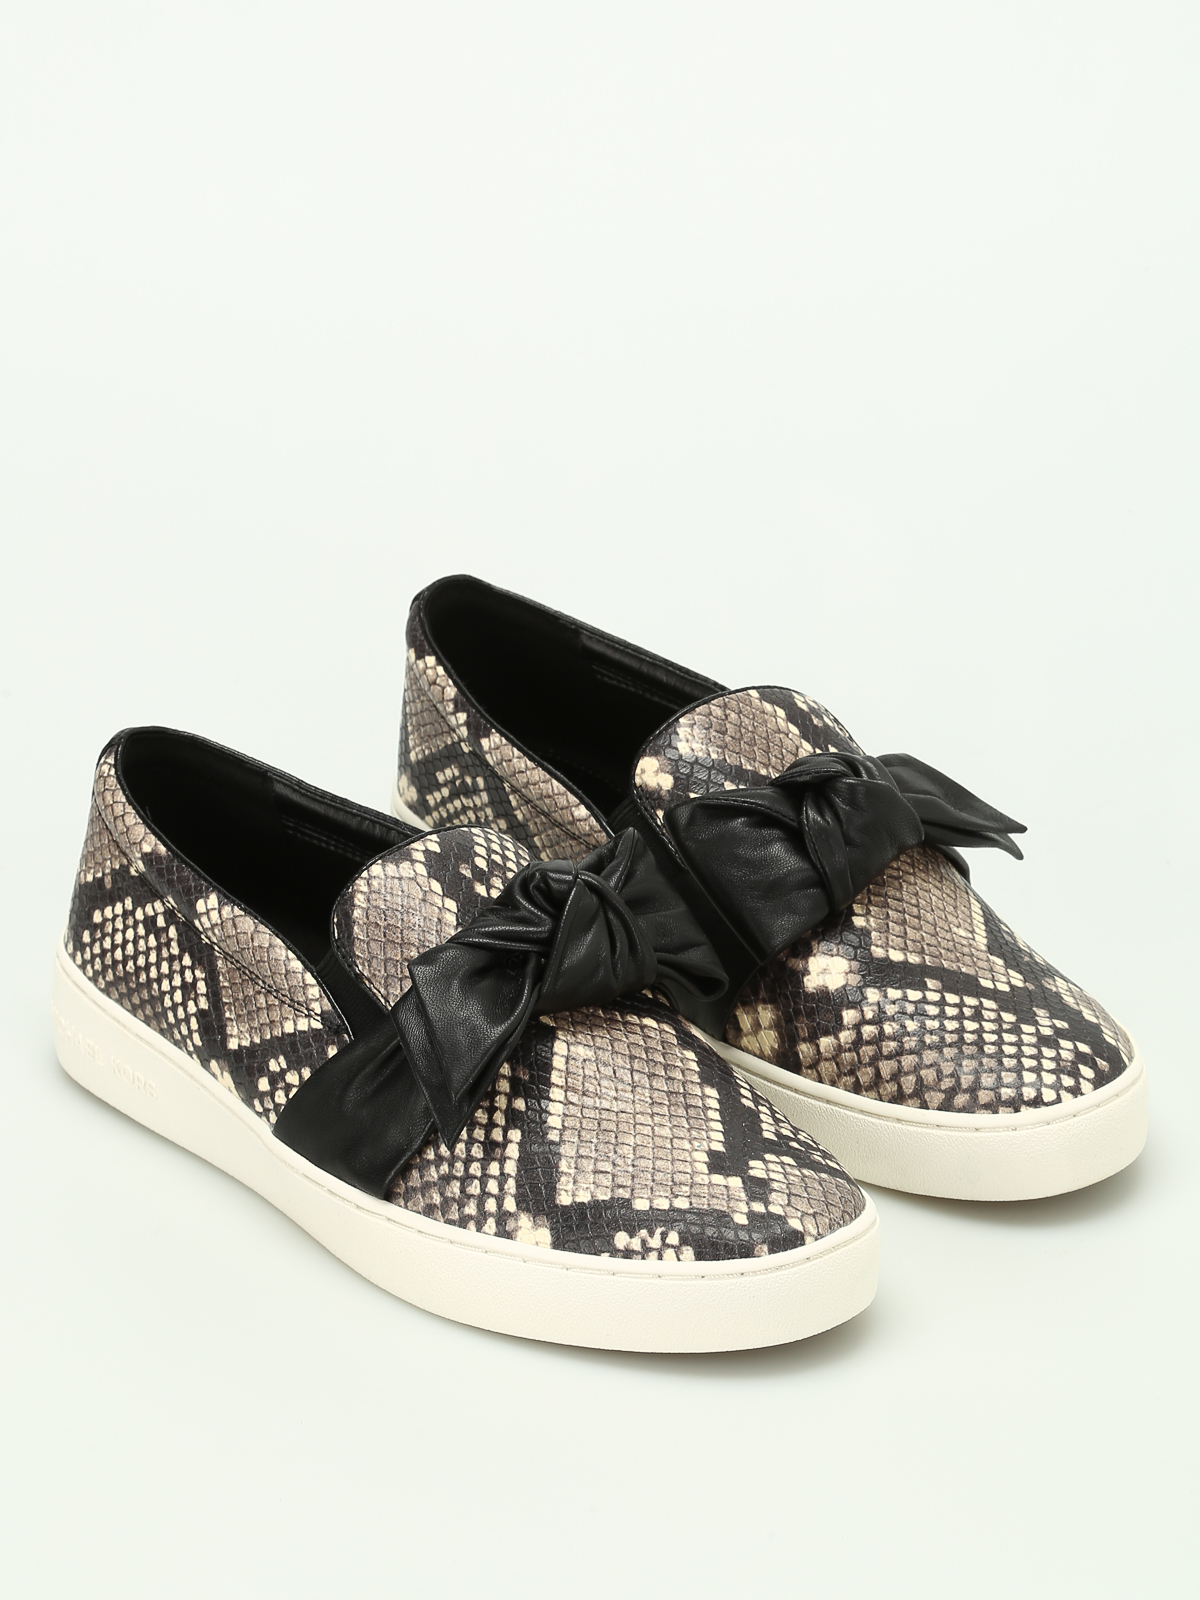 Trainers Michael Kors - Willa snake print leather slip-ons 